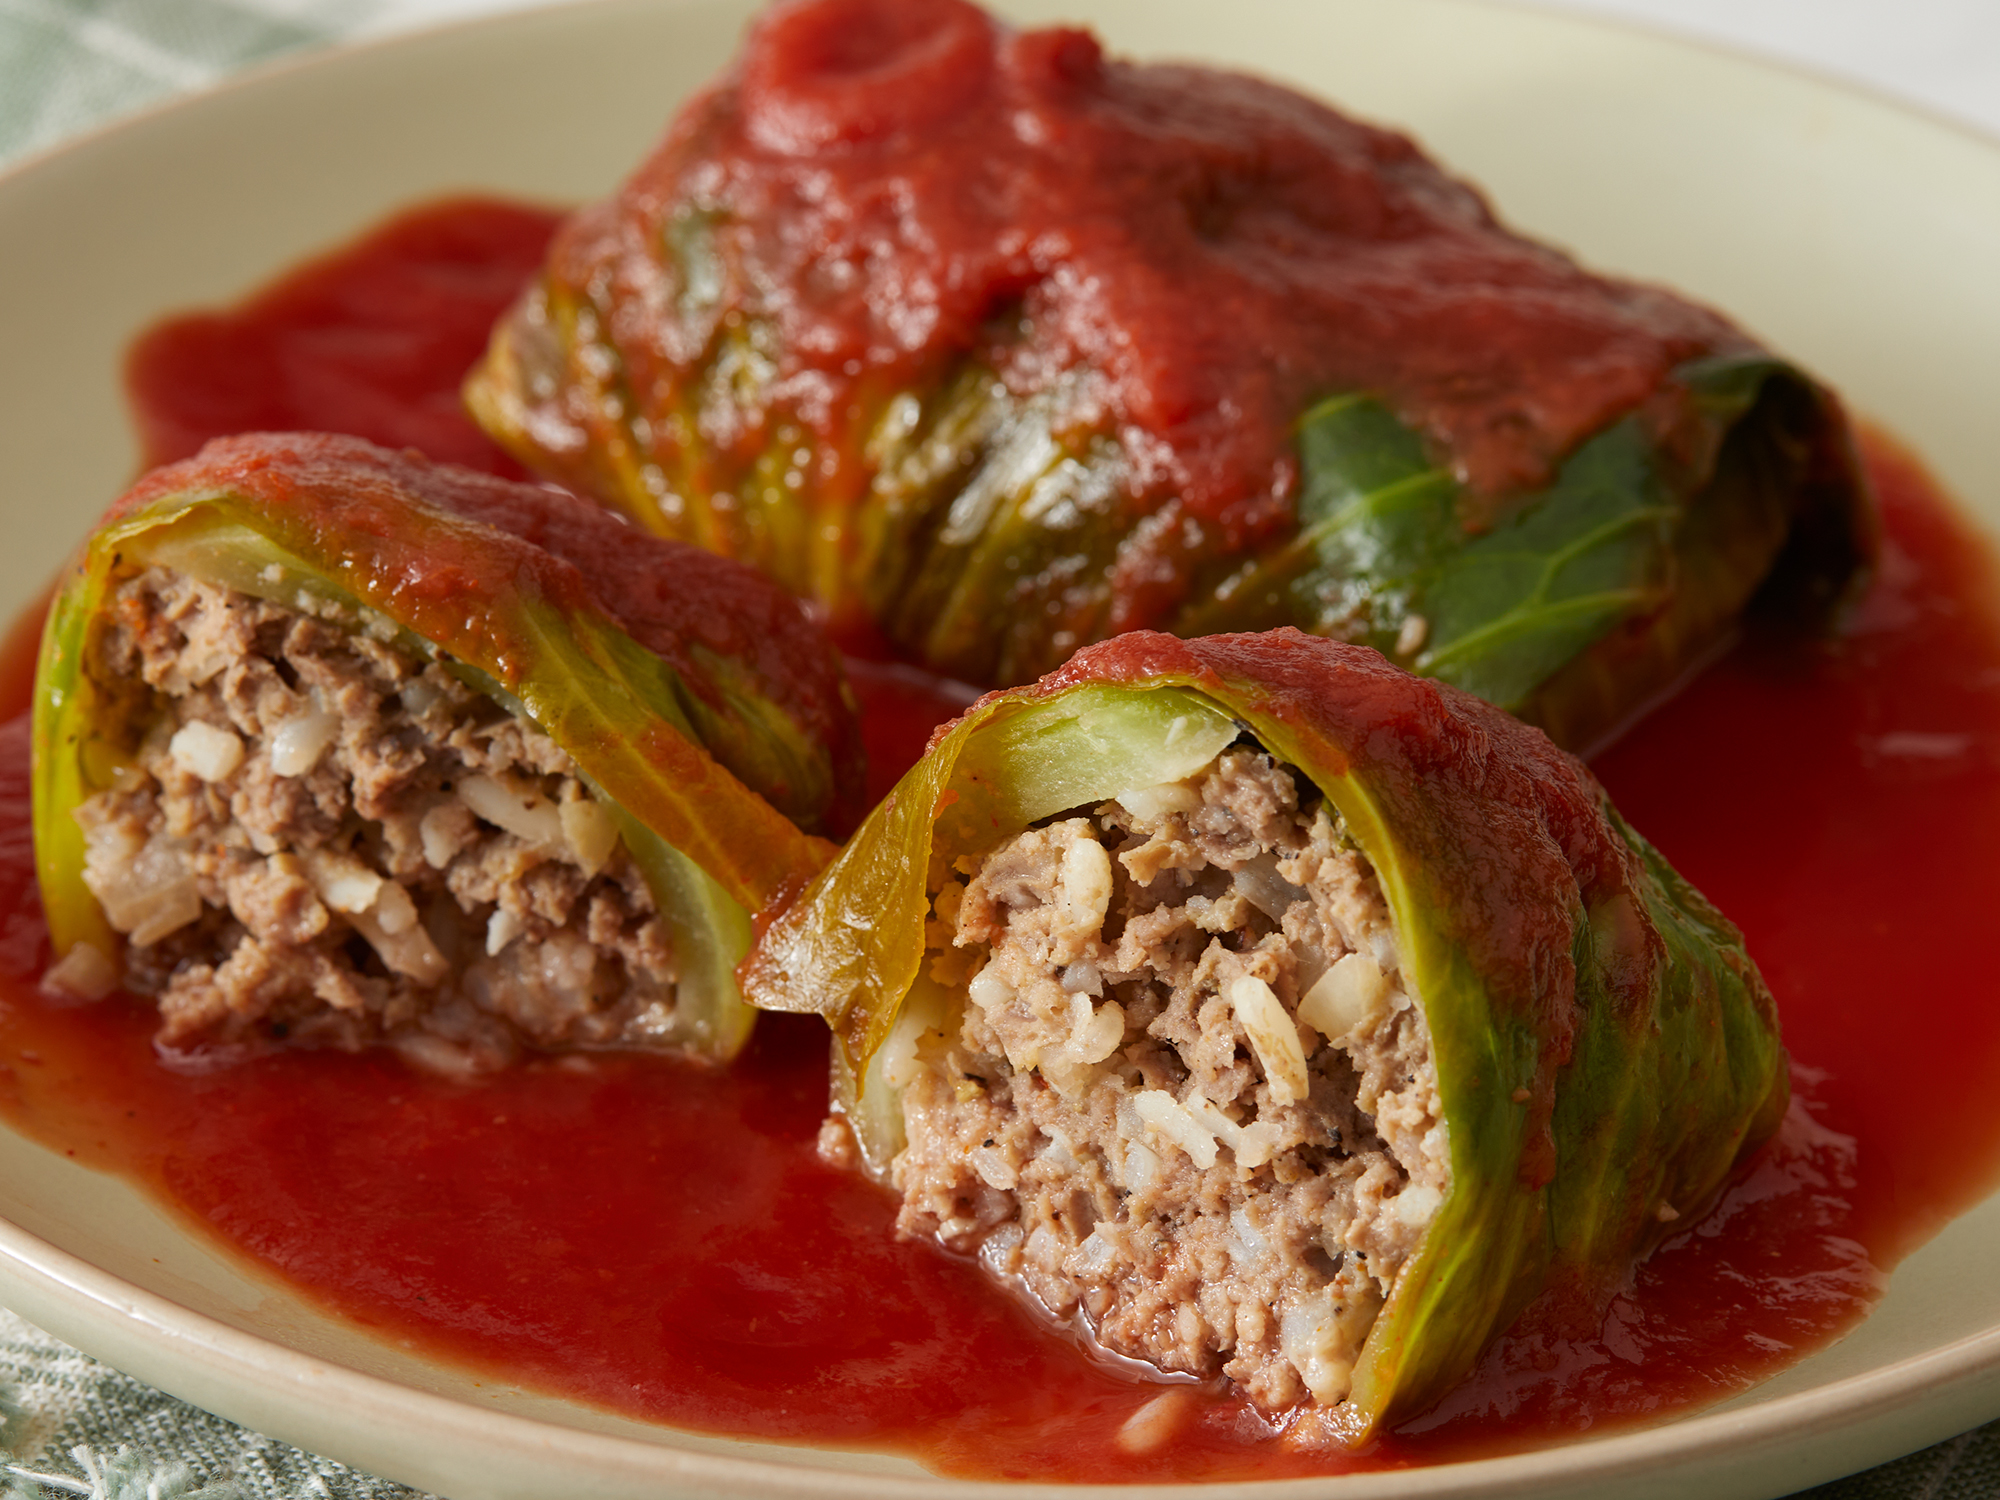 looking at two cabbage rolls, with one cut in half to see inside filling